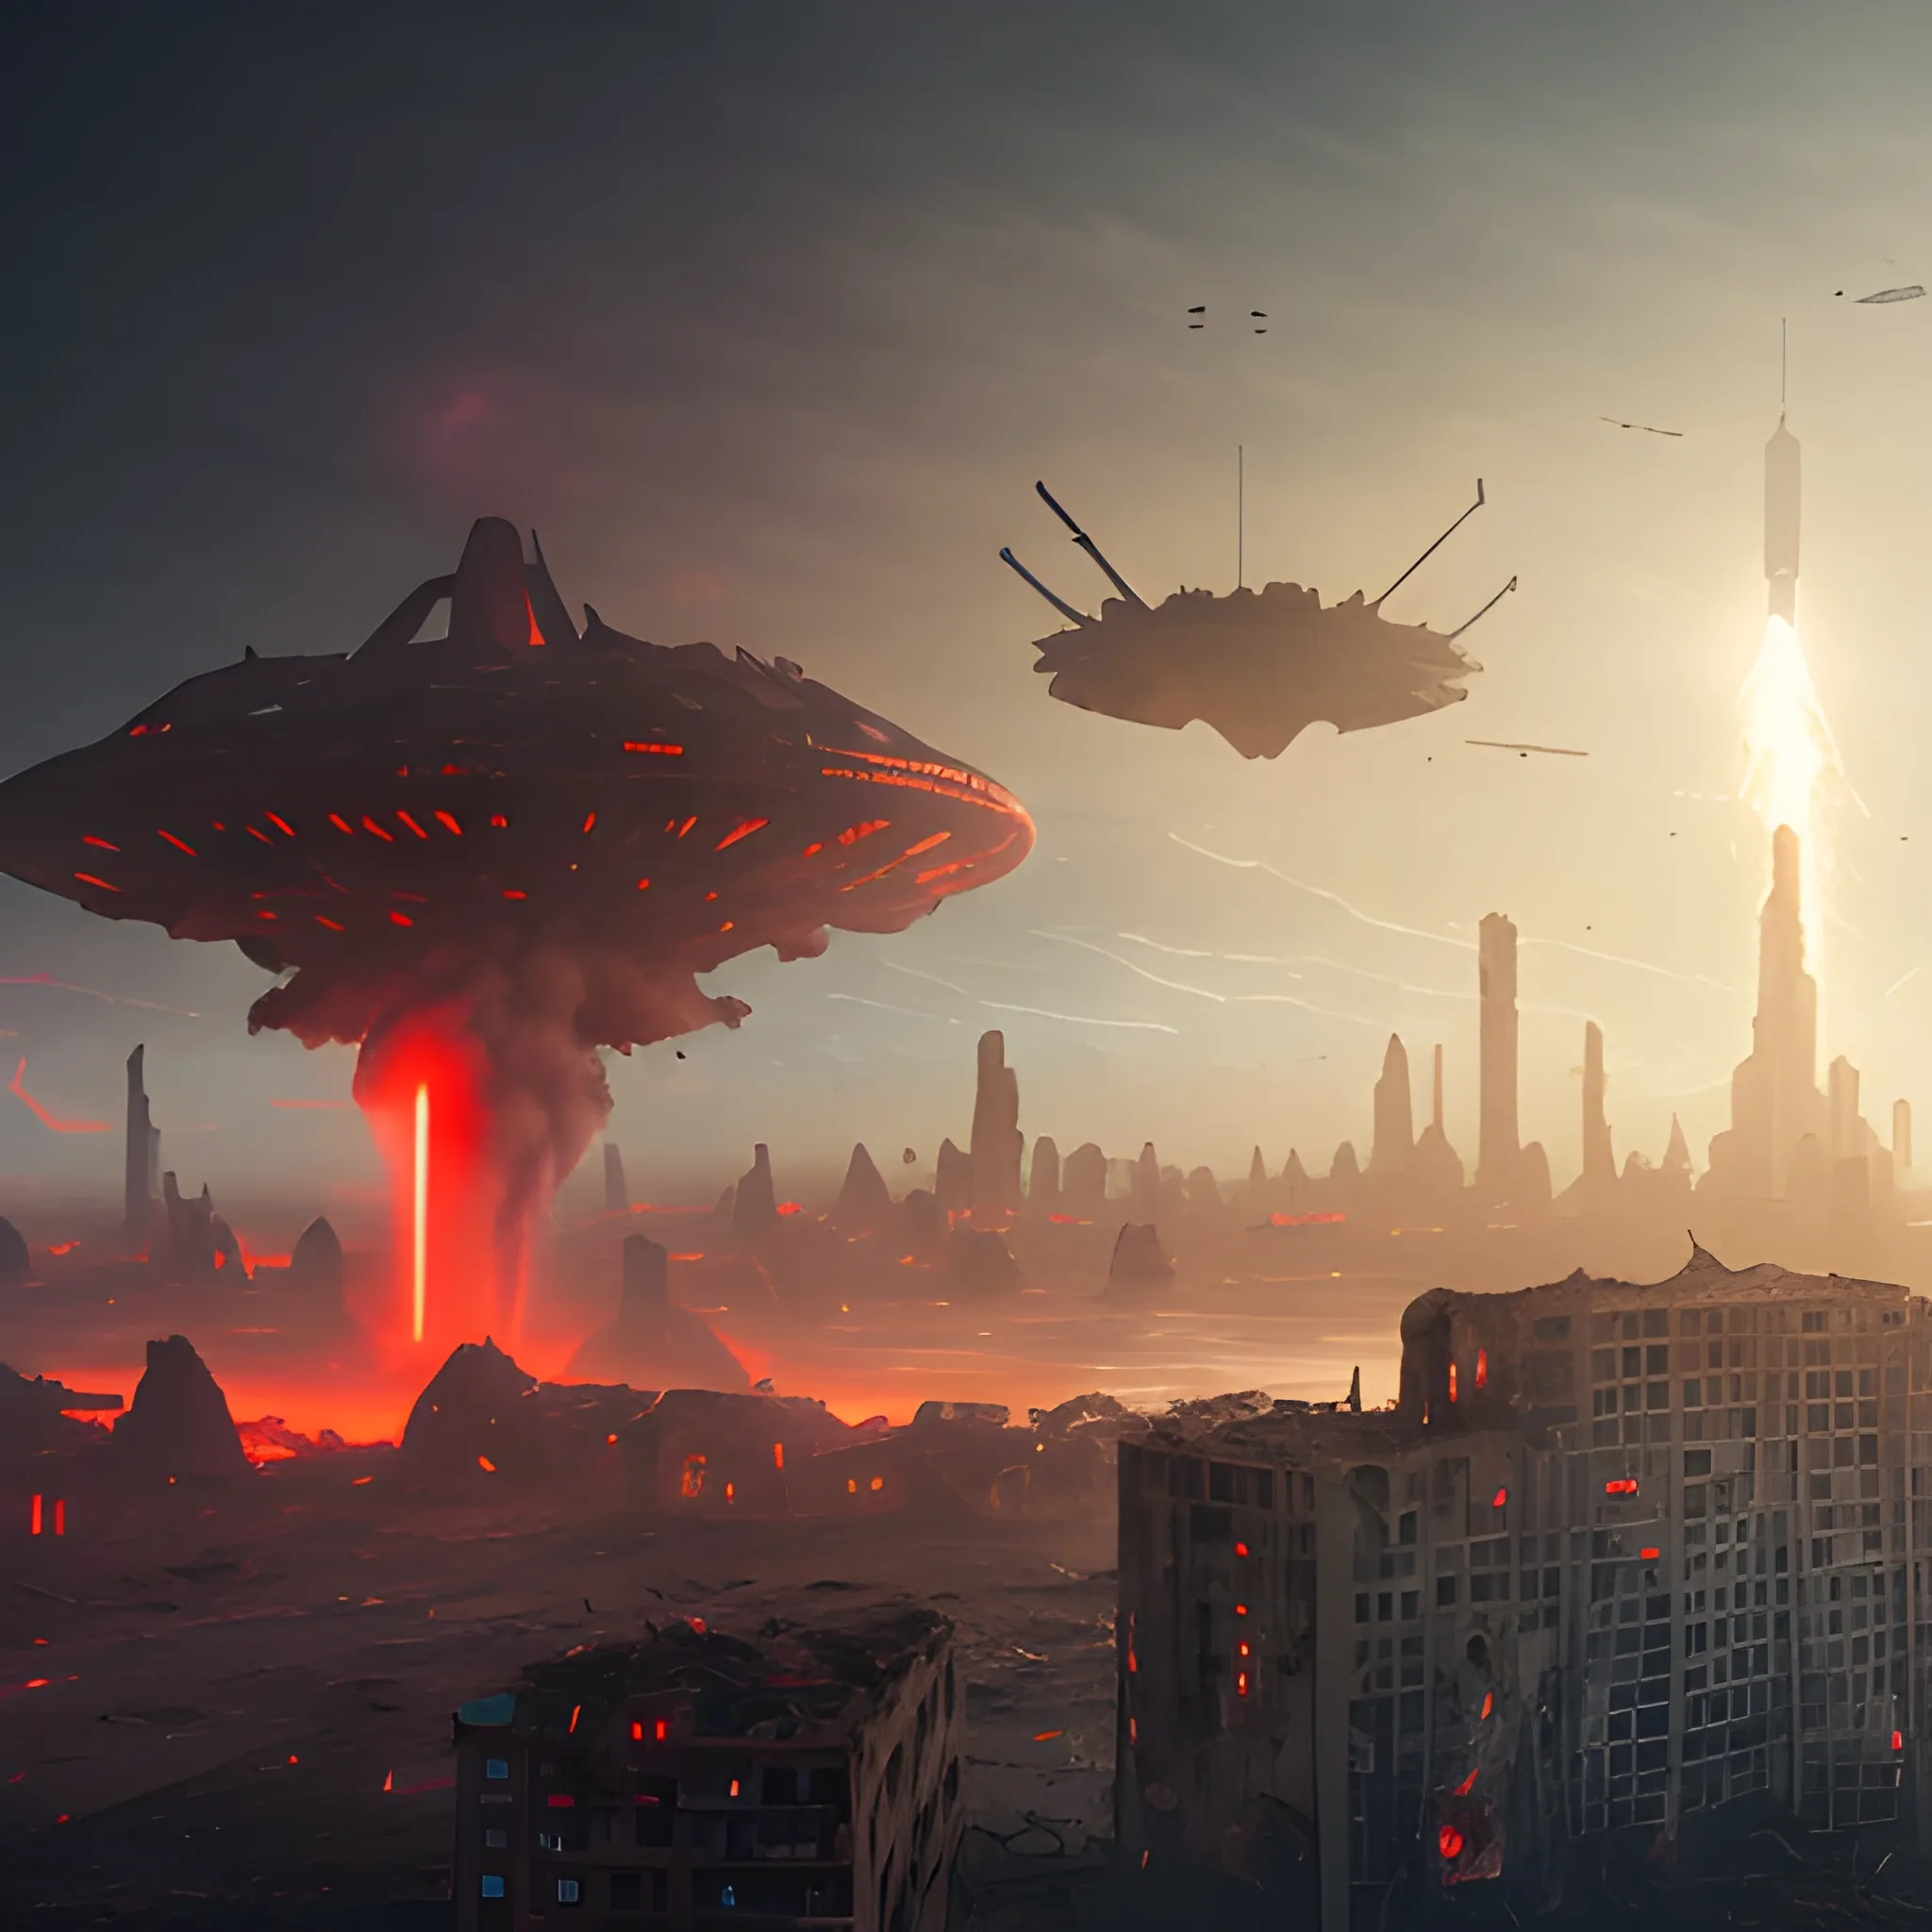 wide shot of a destroyed city with an alien ship hovering over it, misty atmosphere, red beam coming off the ship and exploding a building down below